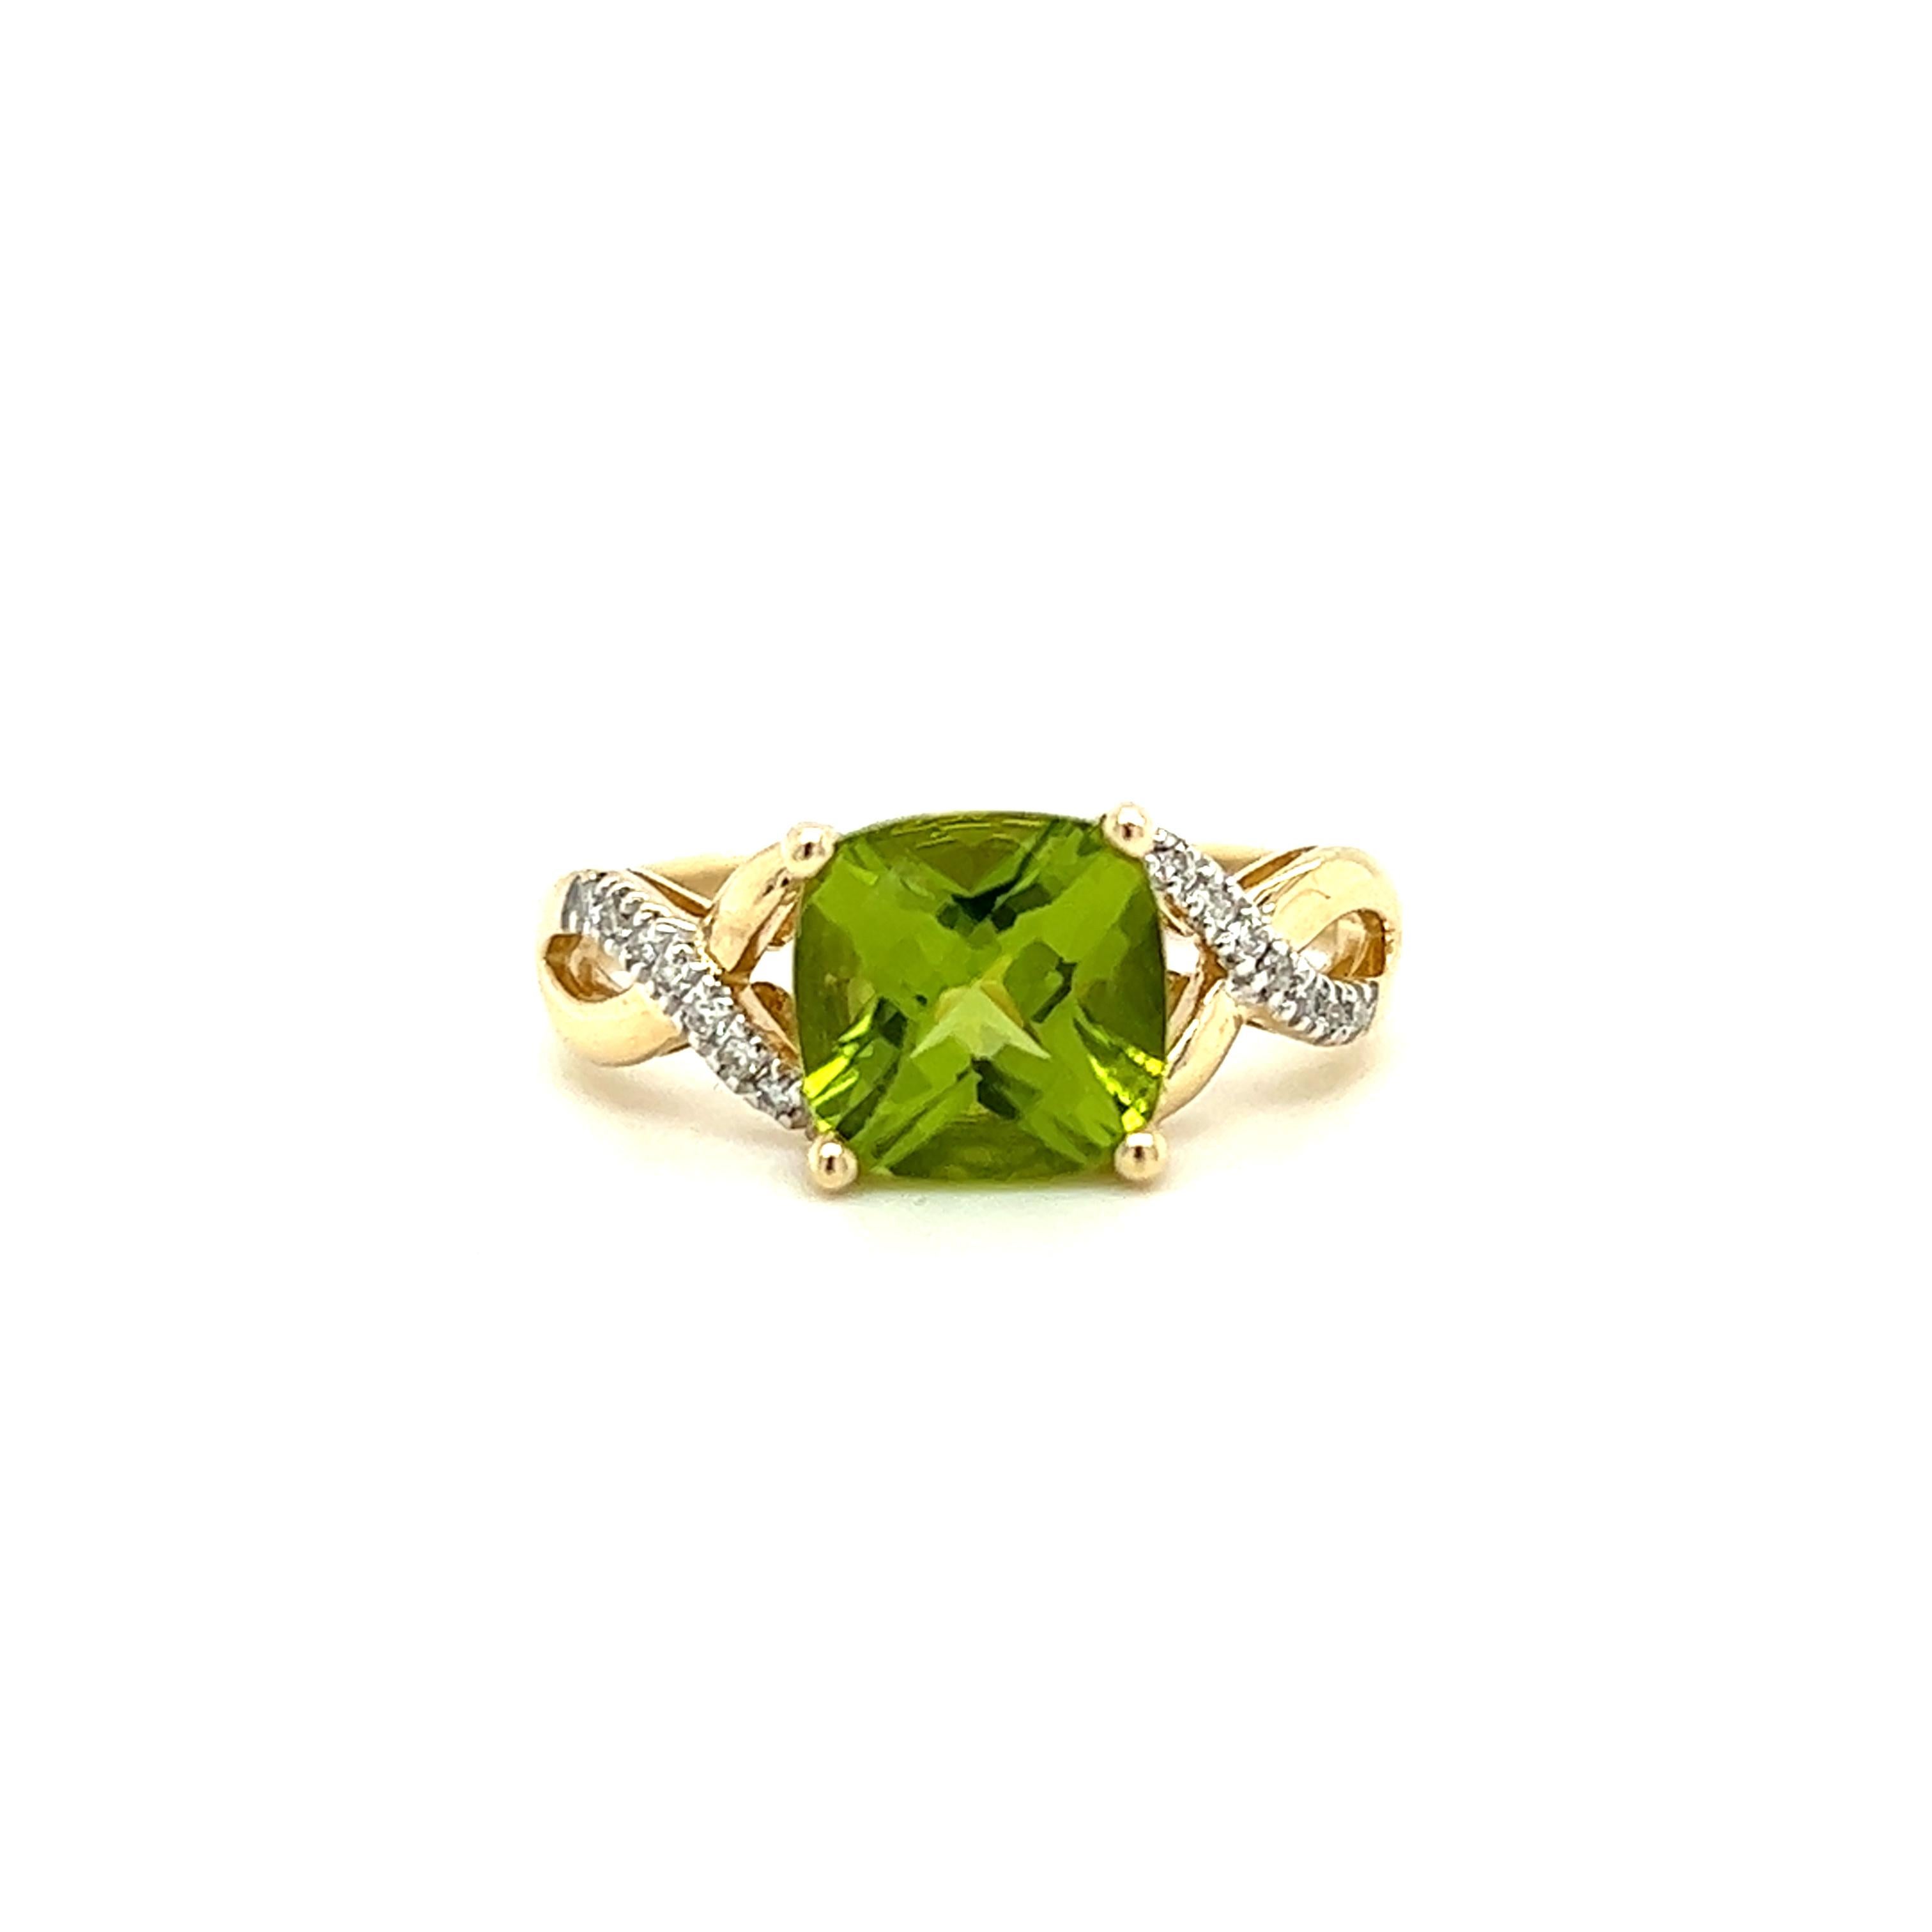 One 14-karat yellow gold ring set with one (1) 8m cushion cut green peridot, and fourteen (14) brilliant cut diamonds, approximately 0.10-carat total weight with matching H/I color and SI1 clarity. The ring is a finger size 7 and can be resized. 